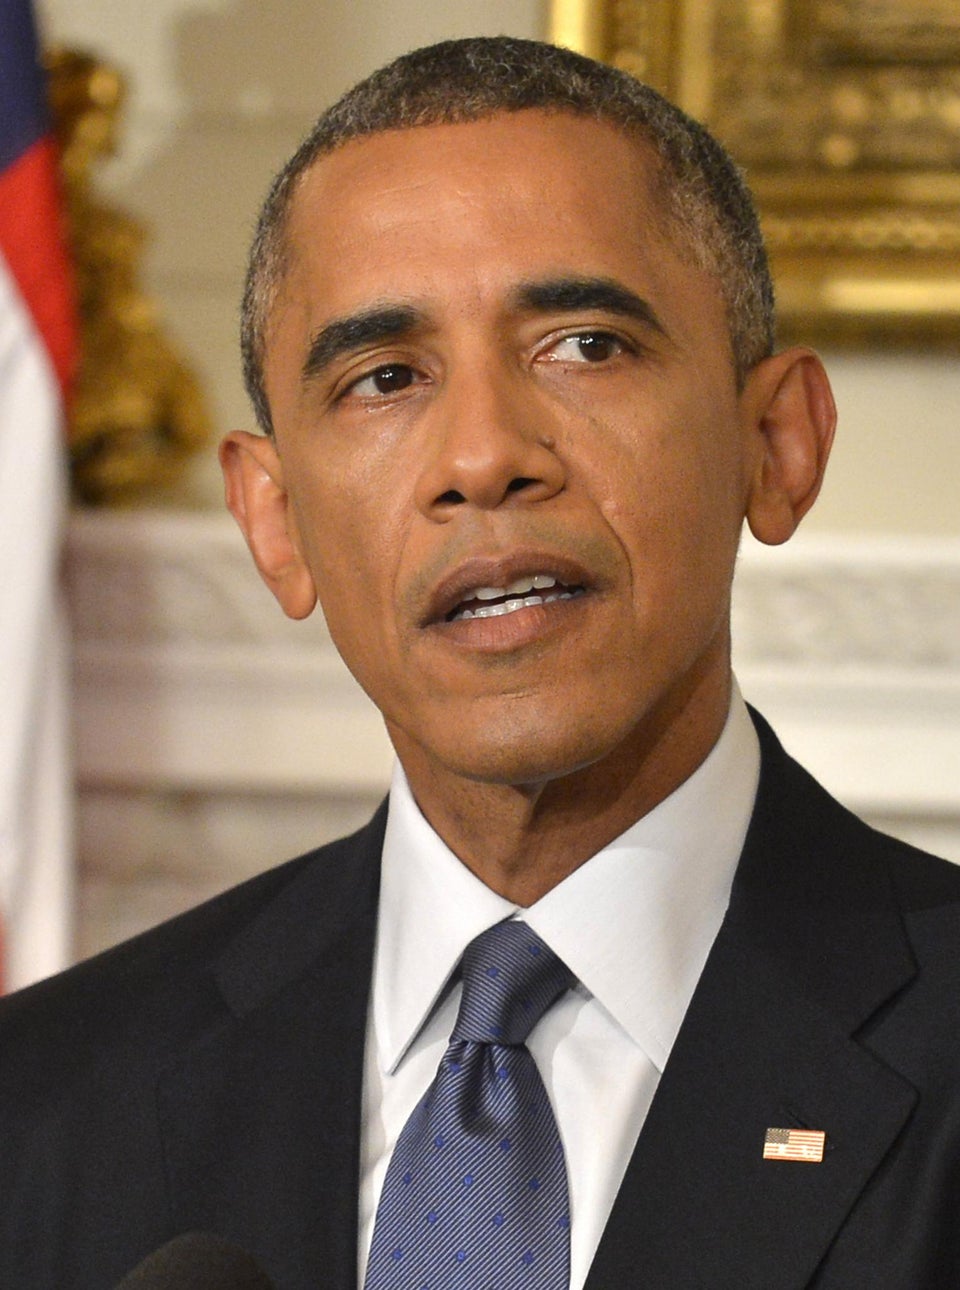 ESSENCE Poll: What More Would You Like to See President Obama Doing for Ferguson?